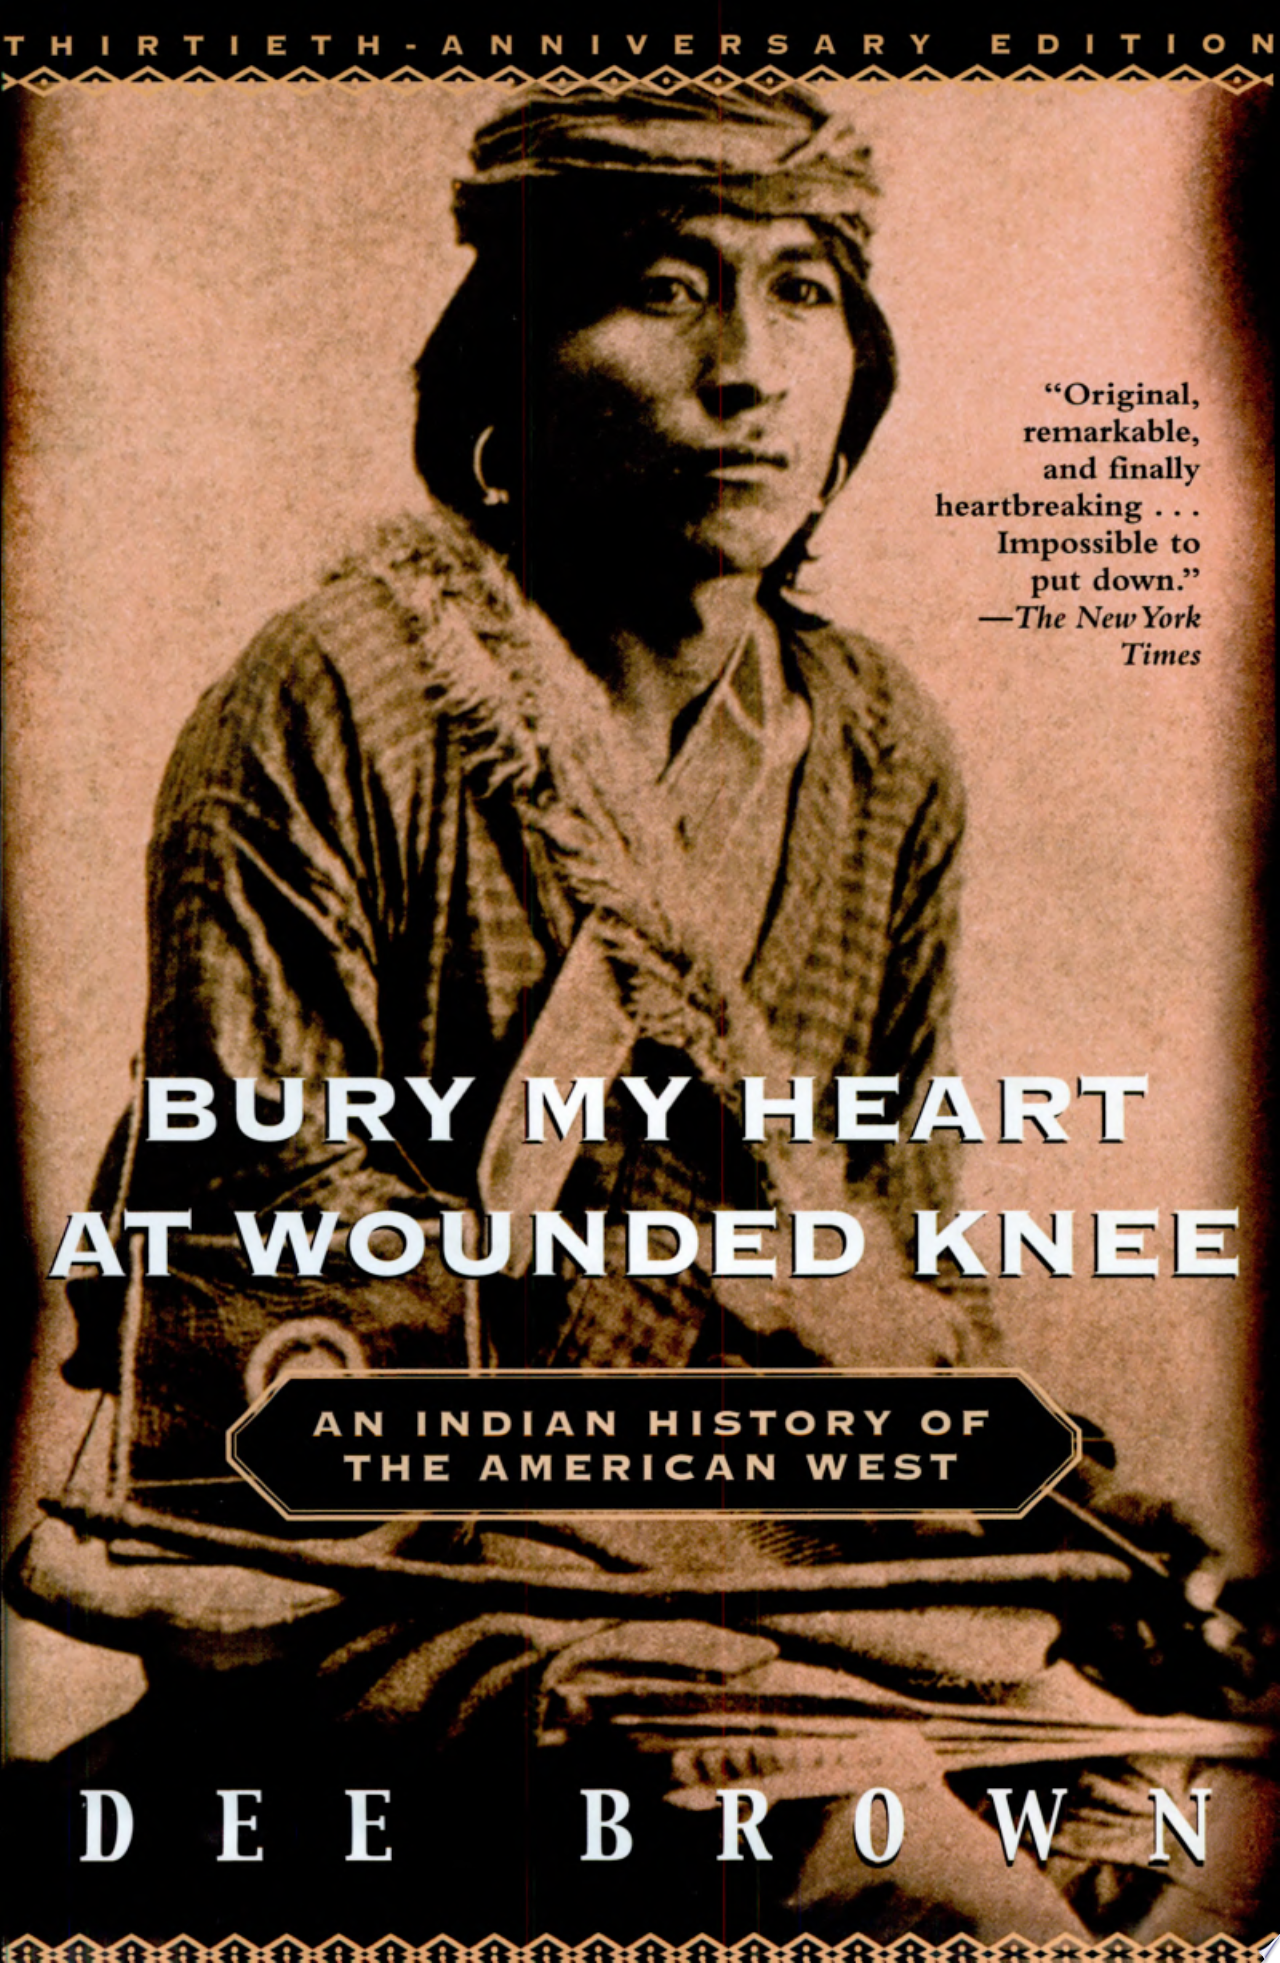 Image for "Bury My Heart at Wounded Knee"